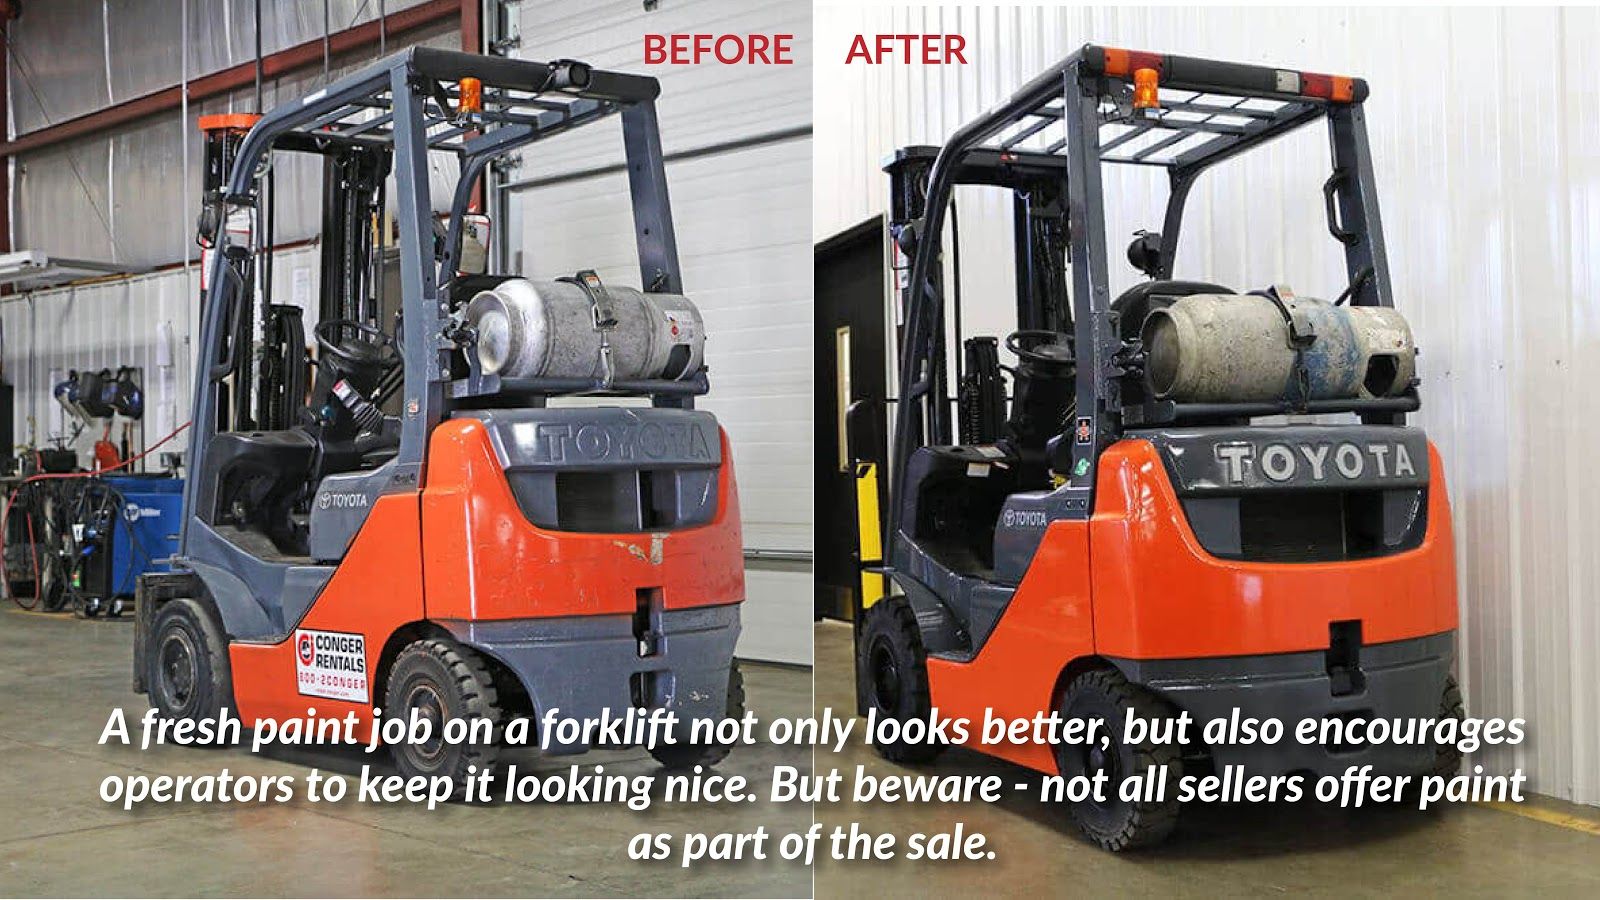 A fresh paint job on a forklift not only looks better, but also encourages operators to keep it looking nice. But beware - not all sellers offer paint as part of the sale.